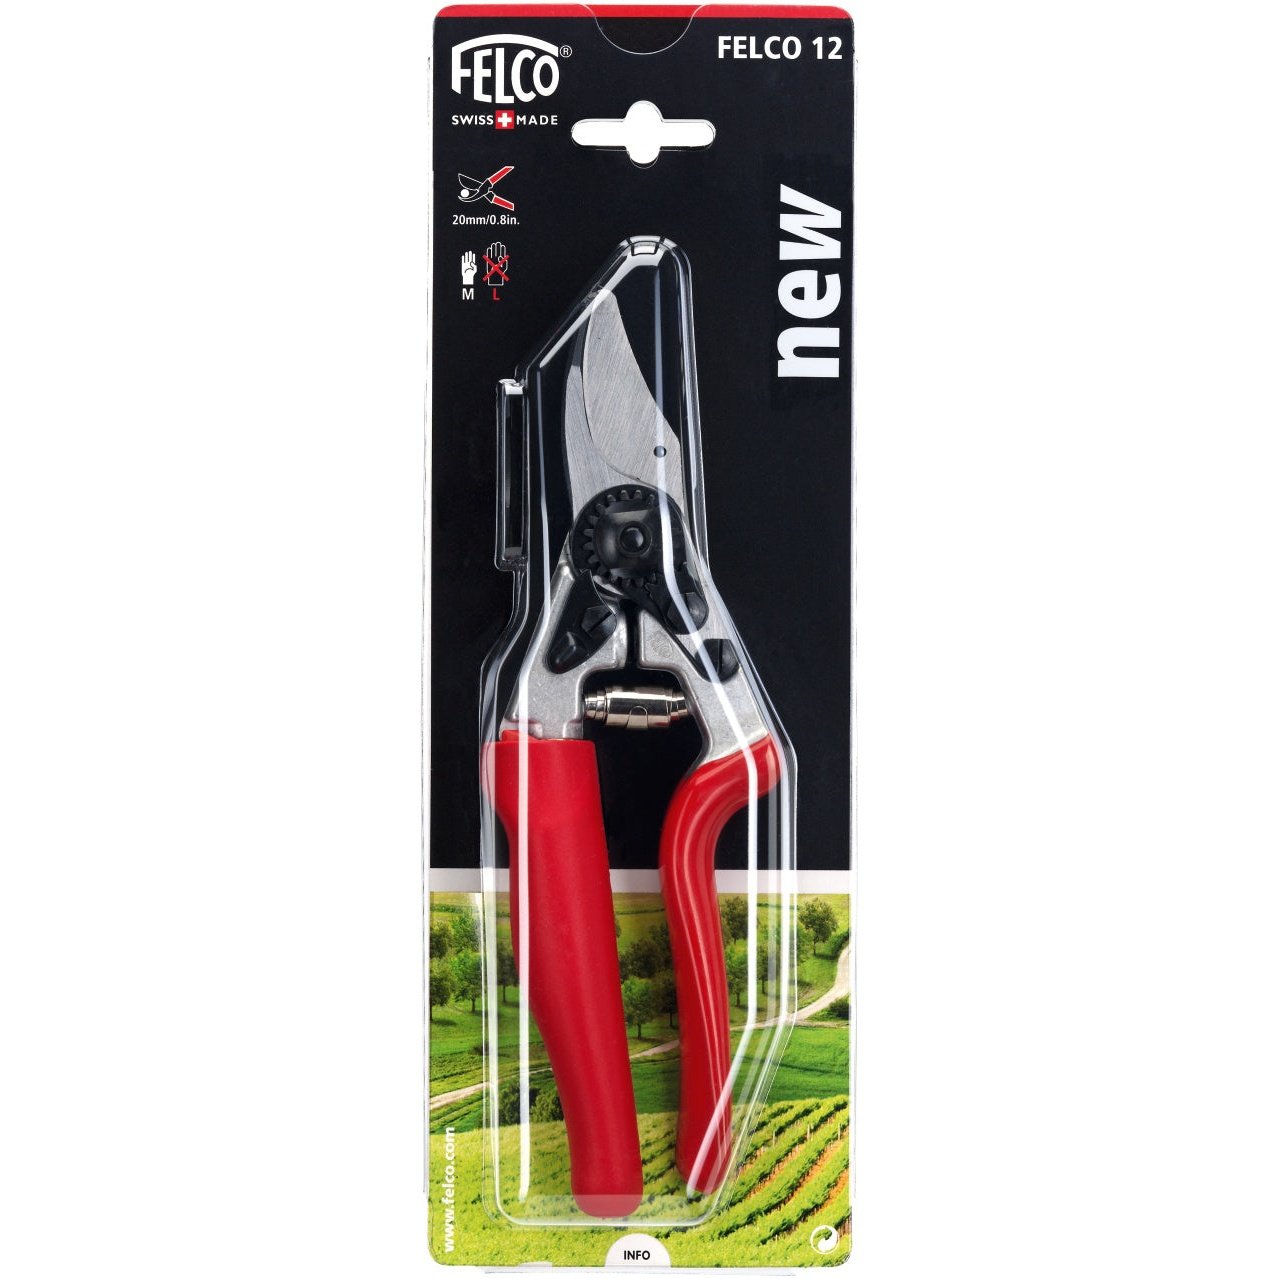 Felco 12 Rotating Handle Compact Bypass Pruner F12